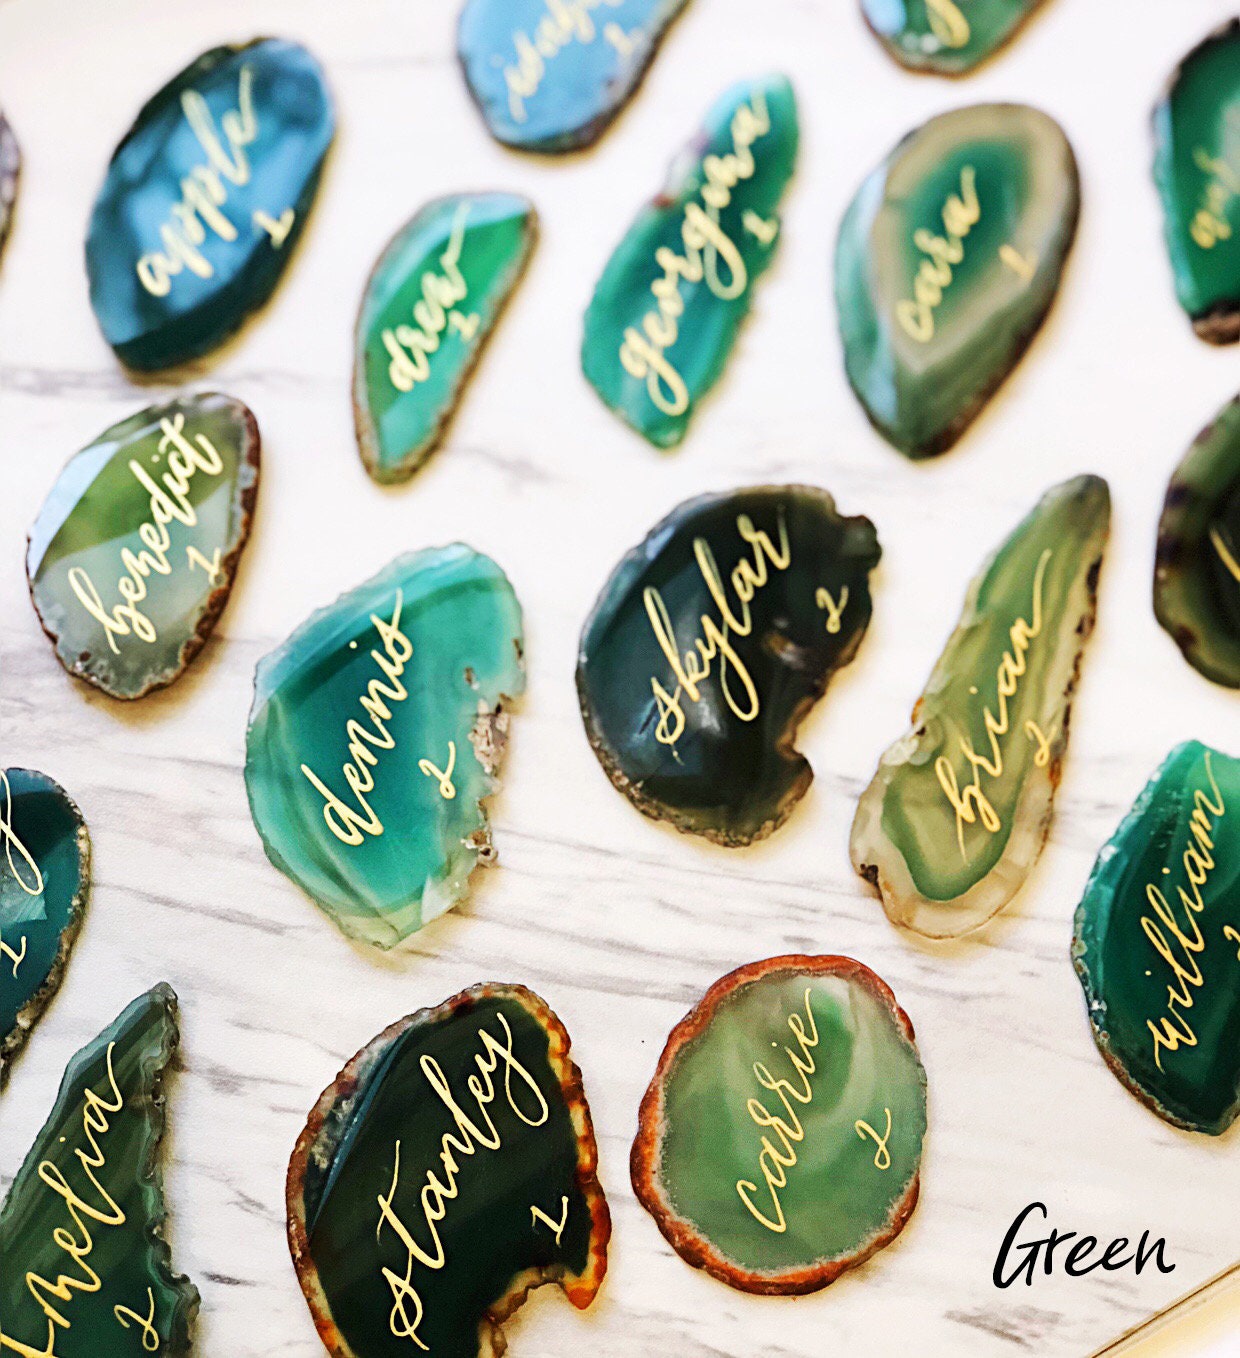 2.5" - 3" Teal Agate Slice Calligraphy Name Place Cards | Agate Calligraphy Name Cards